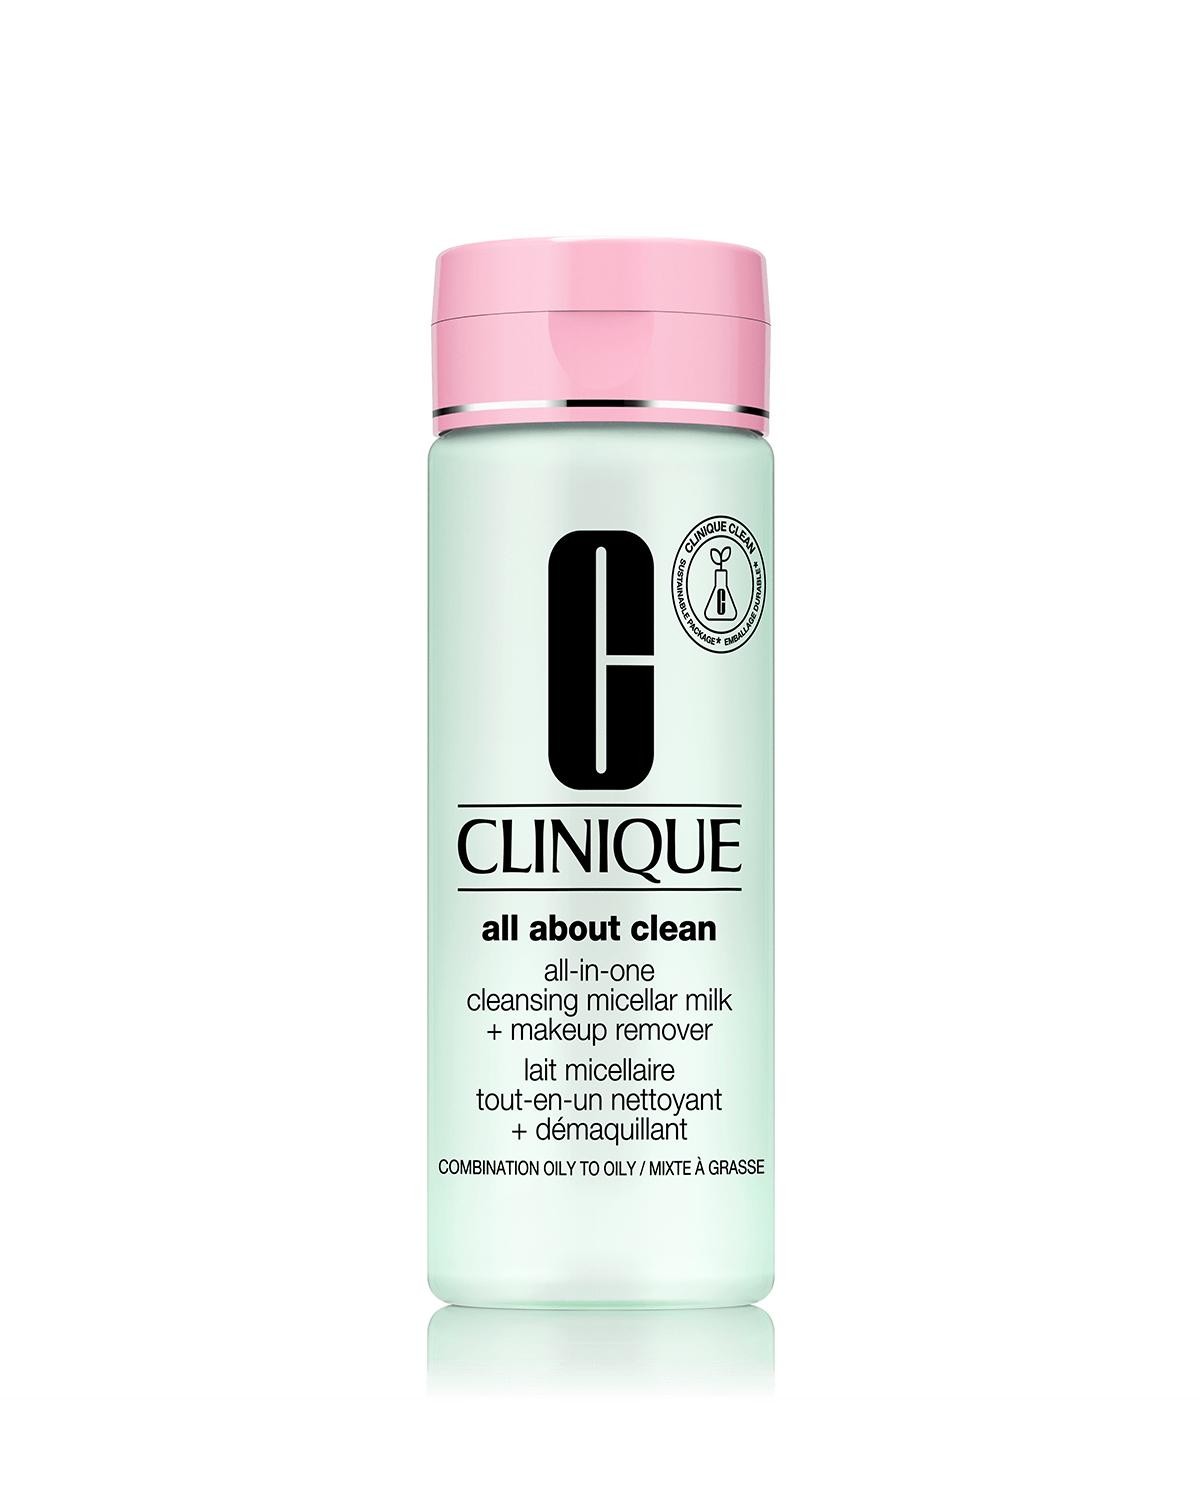 Clinique All-in-One Cleansing Micellar Milk + Makeup Remover (Pelle Tipo III/IV) 200ml